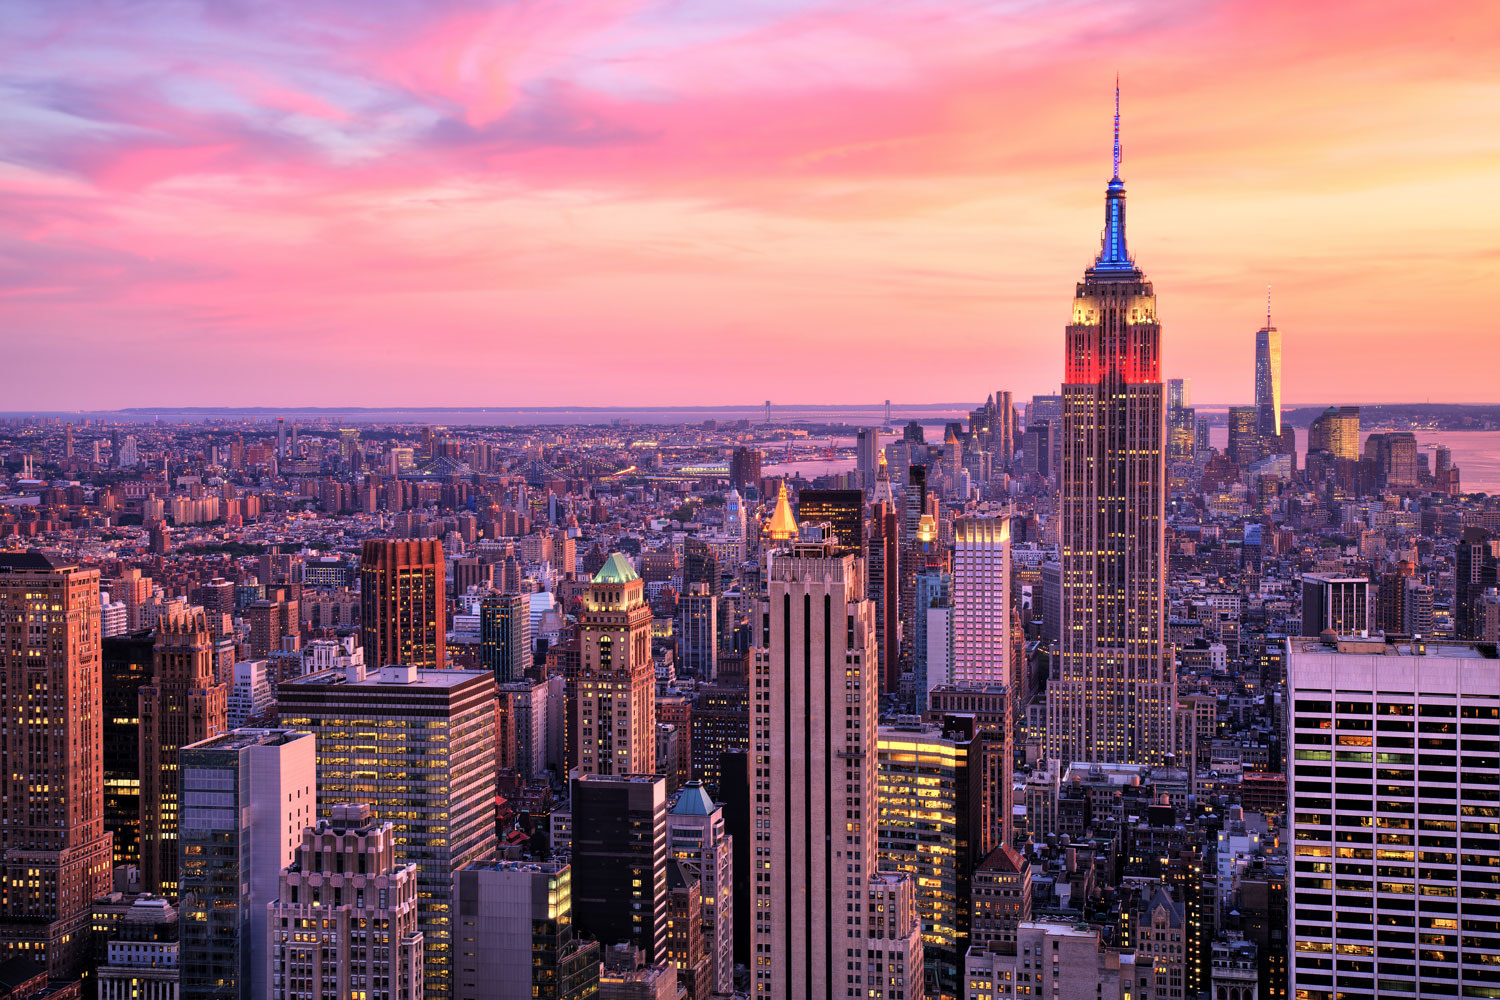 35 Best Things to Do in New York City